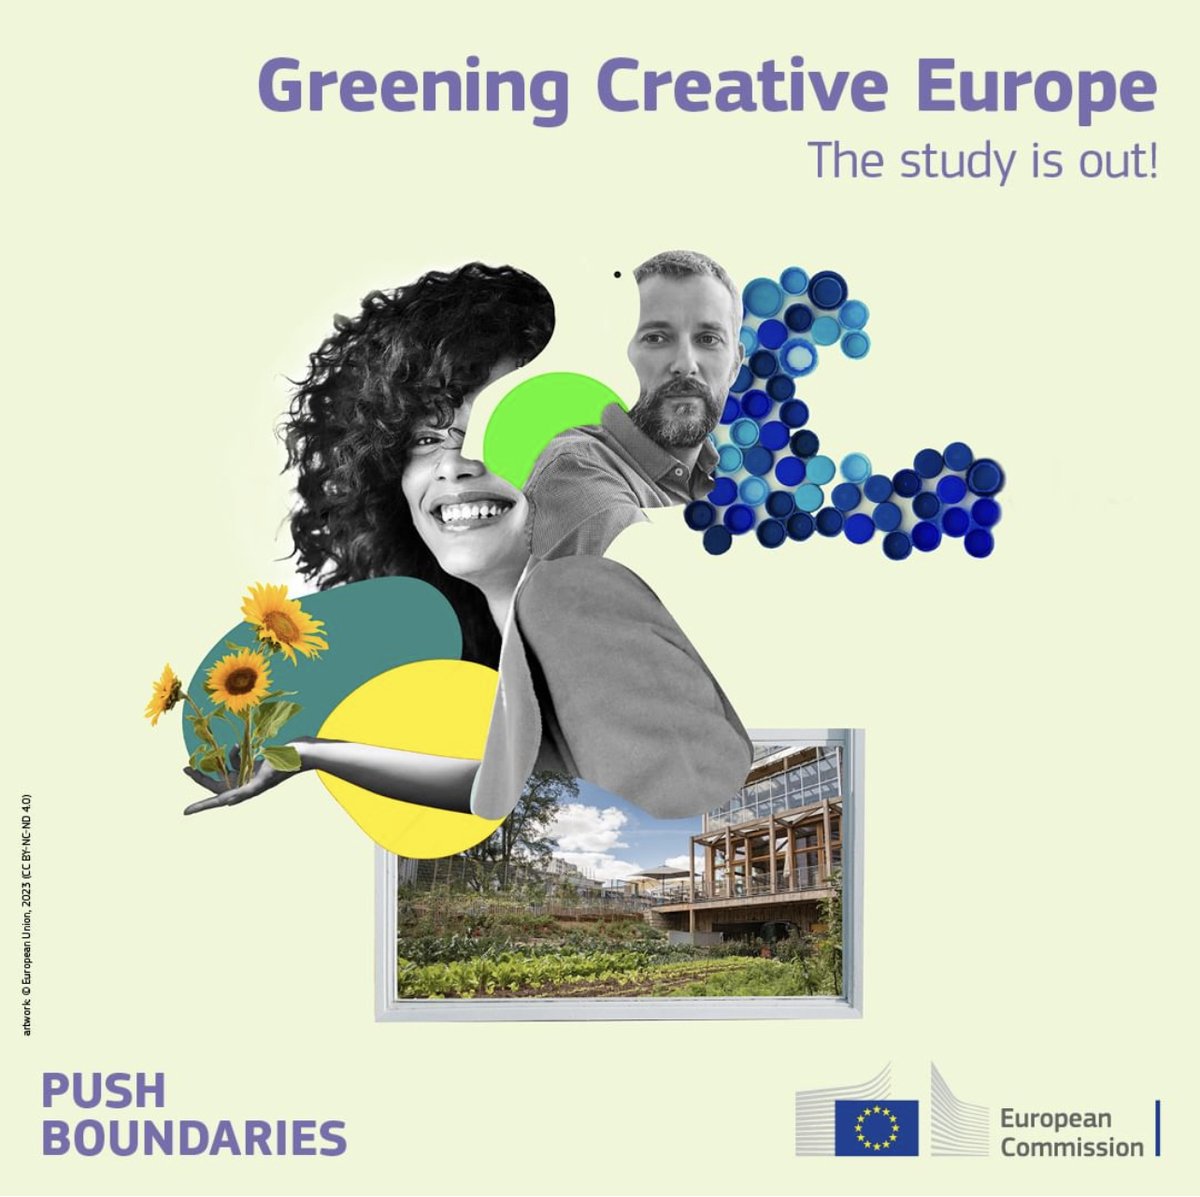 Exciting news. A new study on 'Greening The Creative Europe Programme' is out!🌿 It promotes a sustainable future for cultural and creative sectors. Let's make a positive impact on the environment! 🌱🌎 Find out how:🔗culture.ec.europa.eu/news/how-creat… #GoGreen